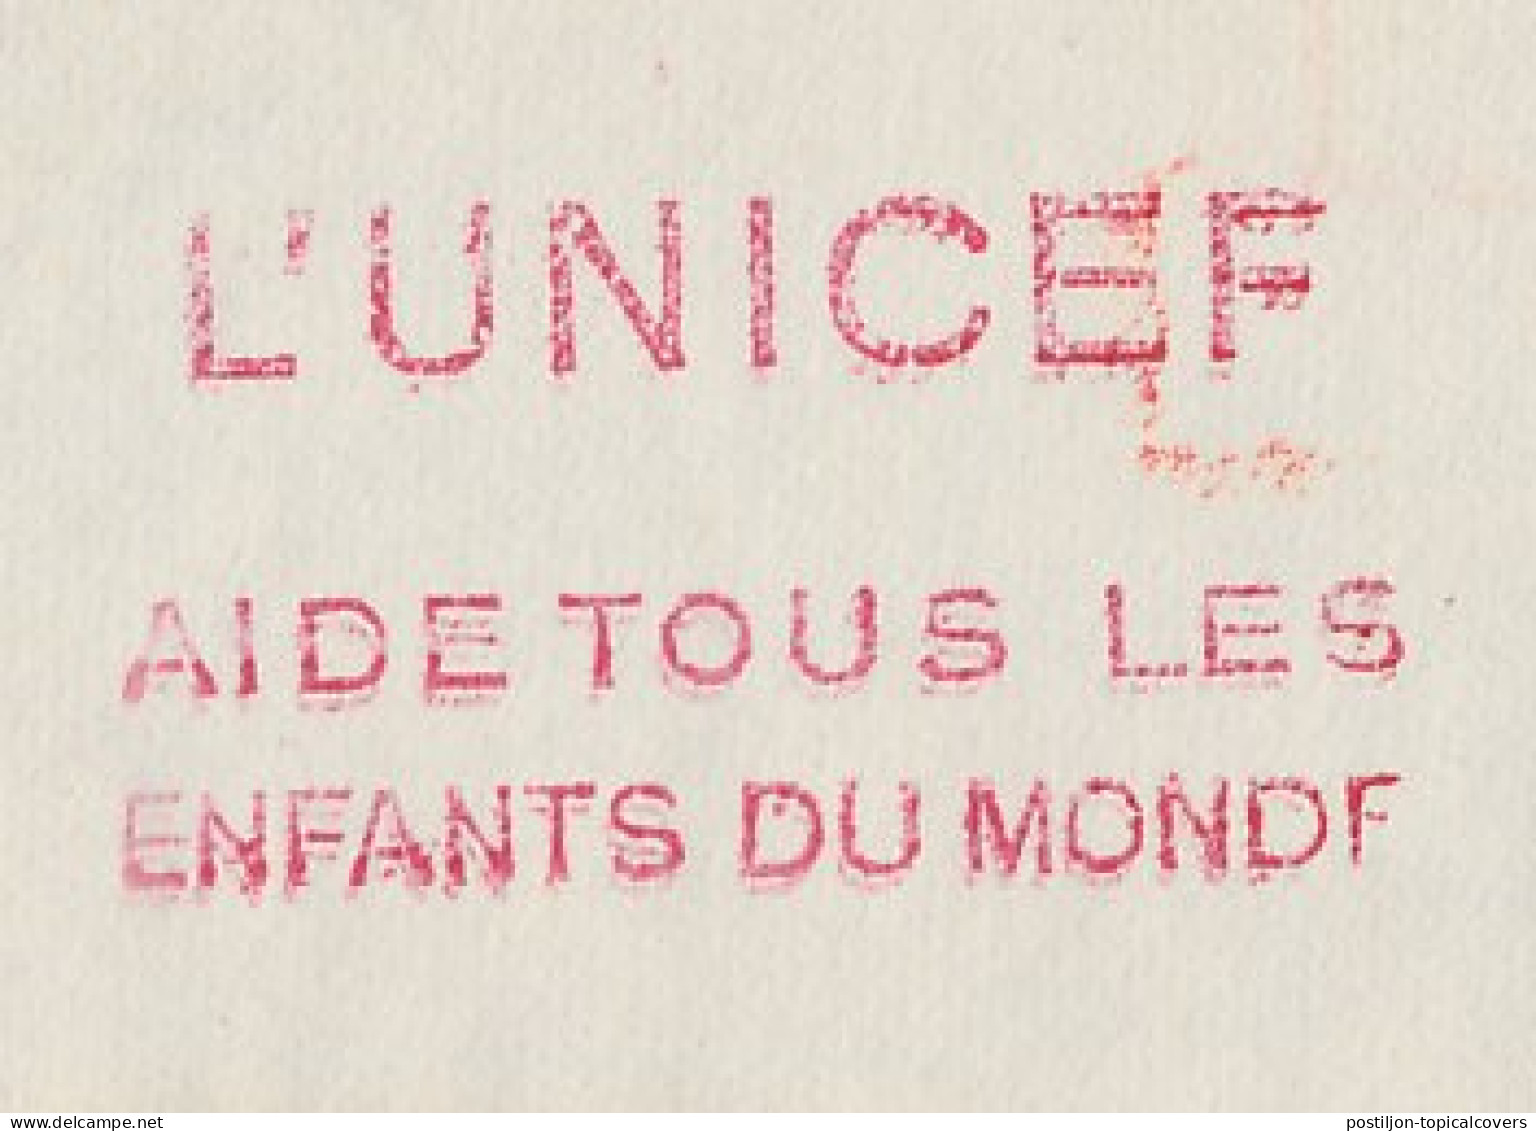 Meter Top Cut France 1959 UNICEF - Help All The Children Of The World - VN